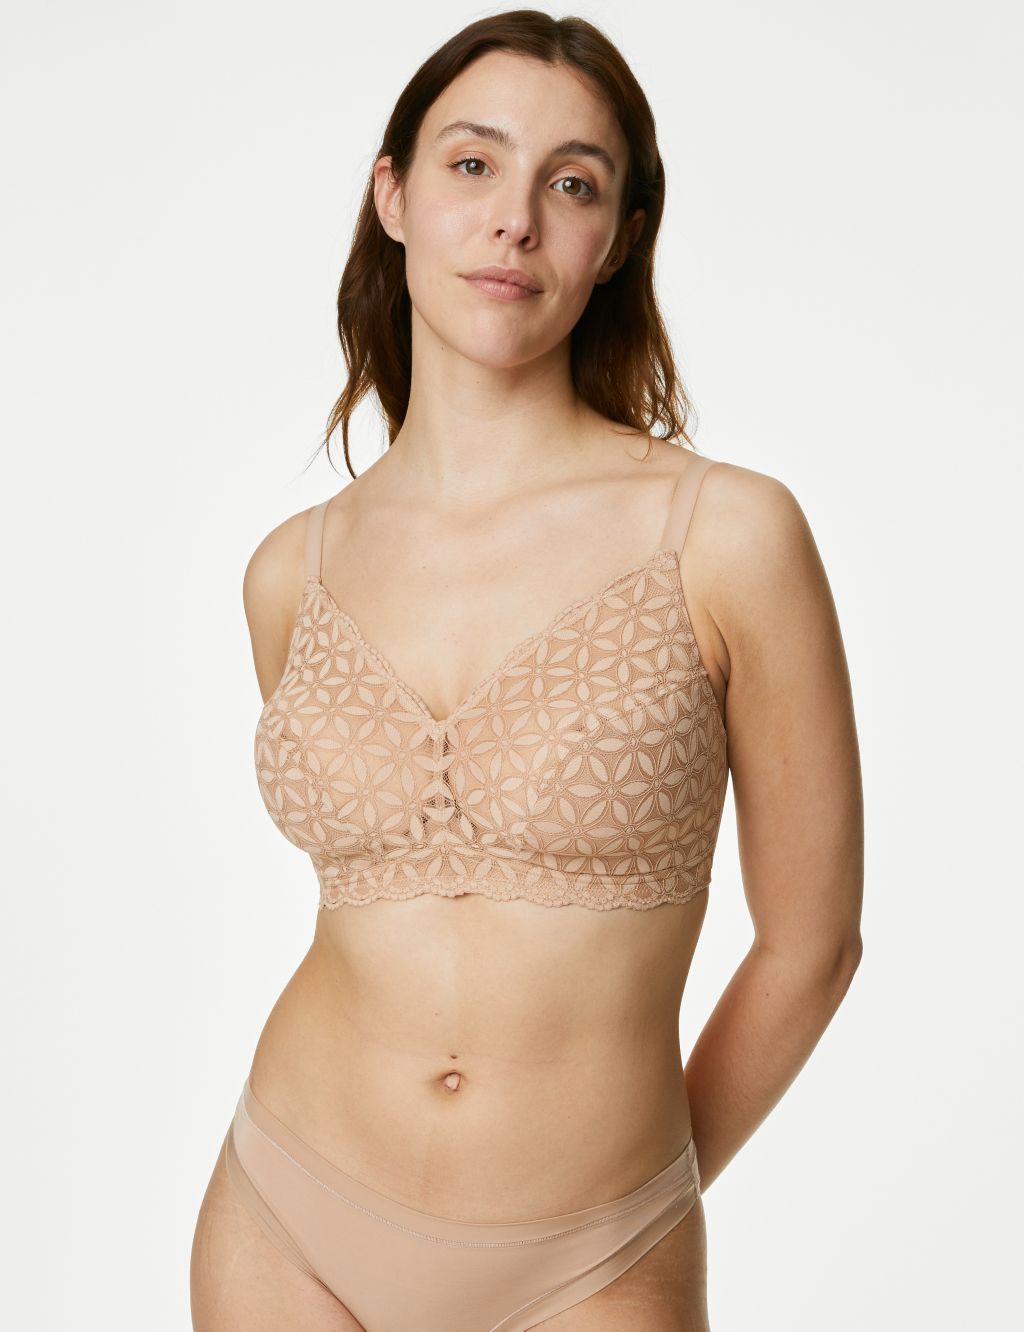 MARKS & SPENCER Underwired Non Padded SMOOTHING Full Cup Bra In NUDE Size  40DD $13.93 - PicClick